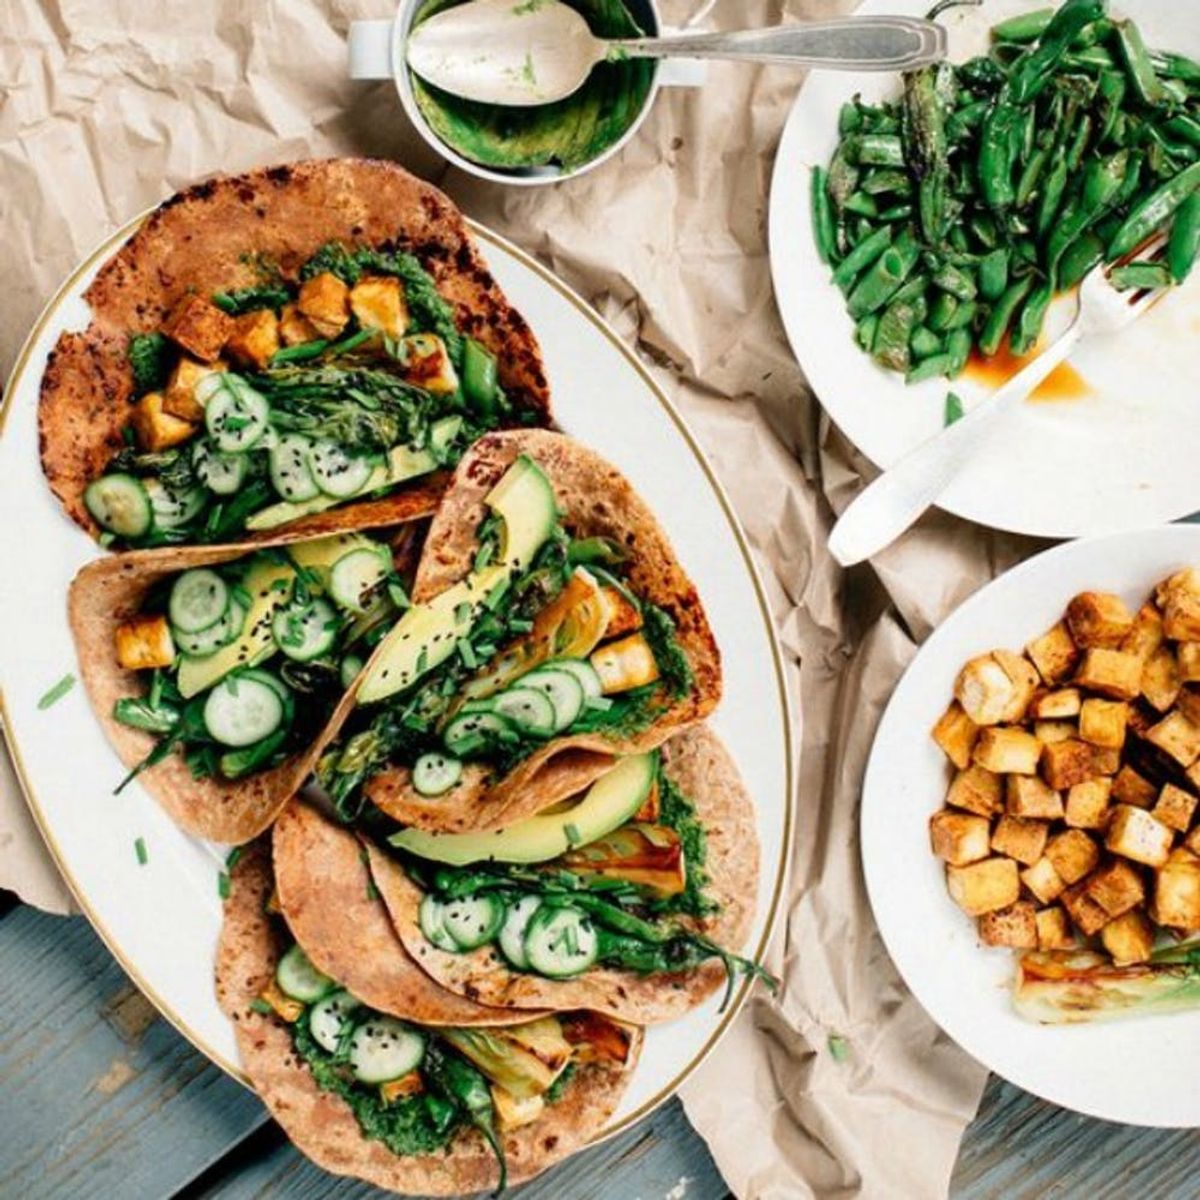 16 Fried Tofu Recipes That Will Blow Your Mind This Meatless Monday